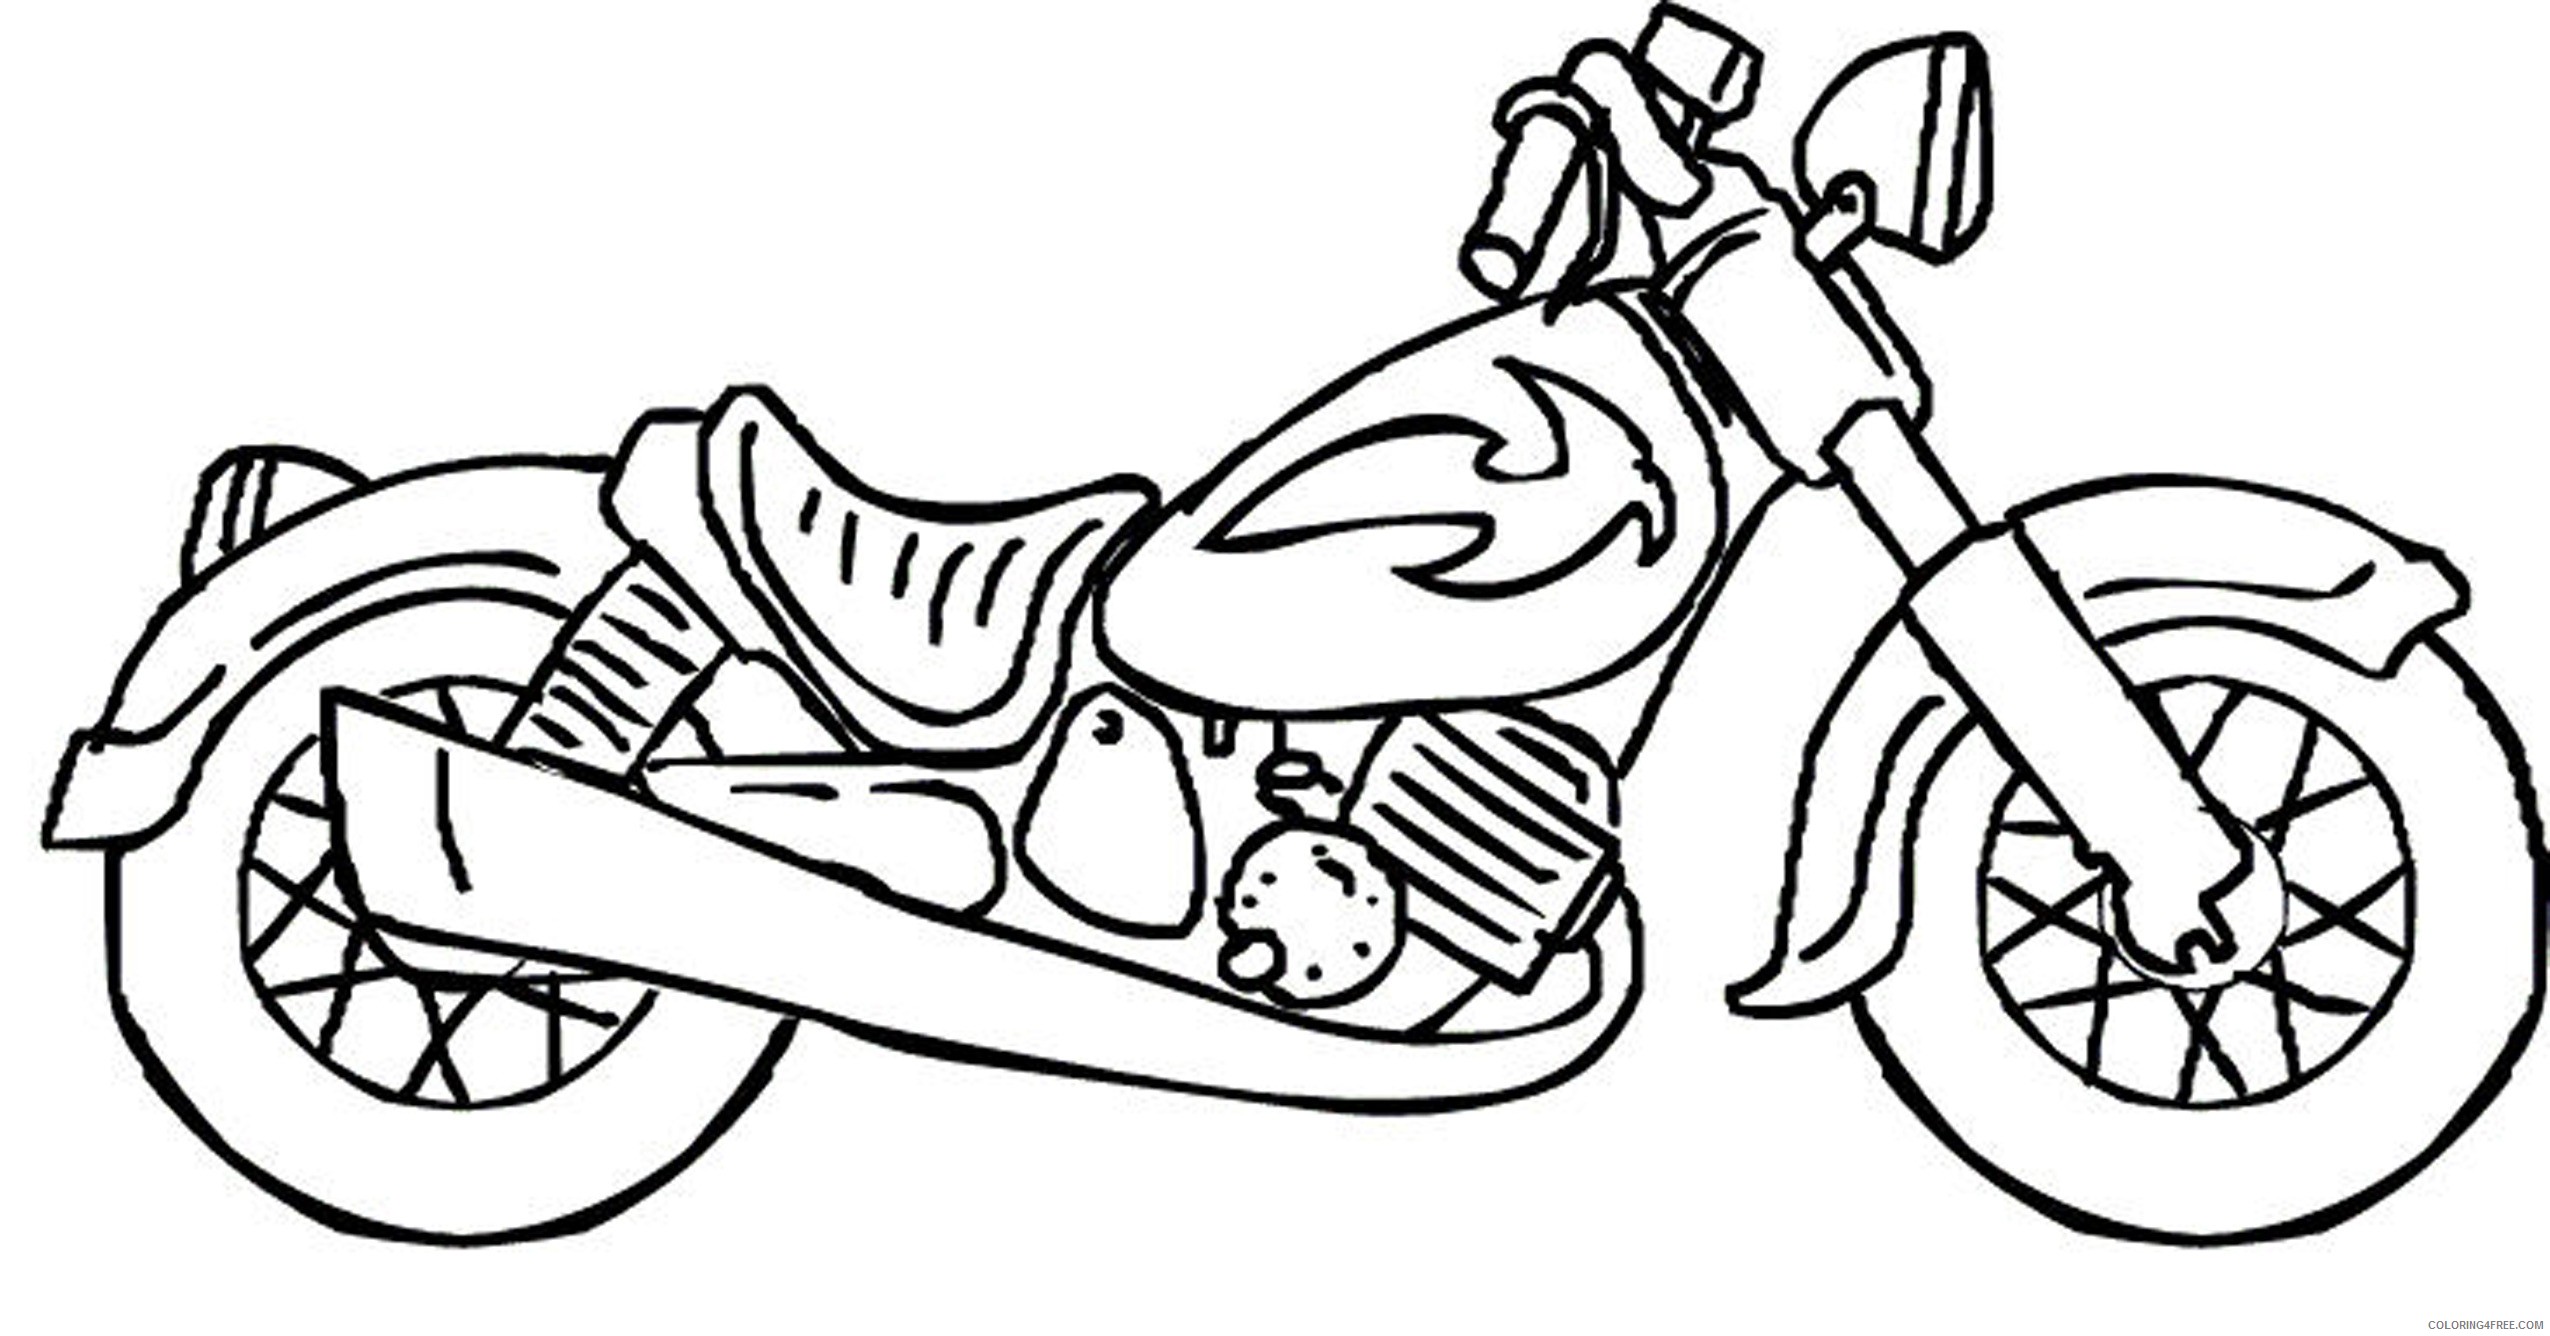 motorcycle coloring pages for kids Coloring4free - Coloring4Free.com